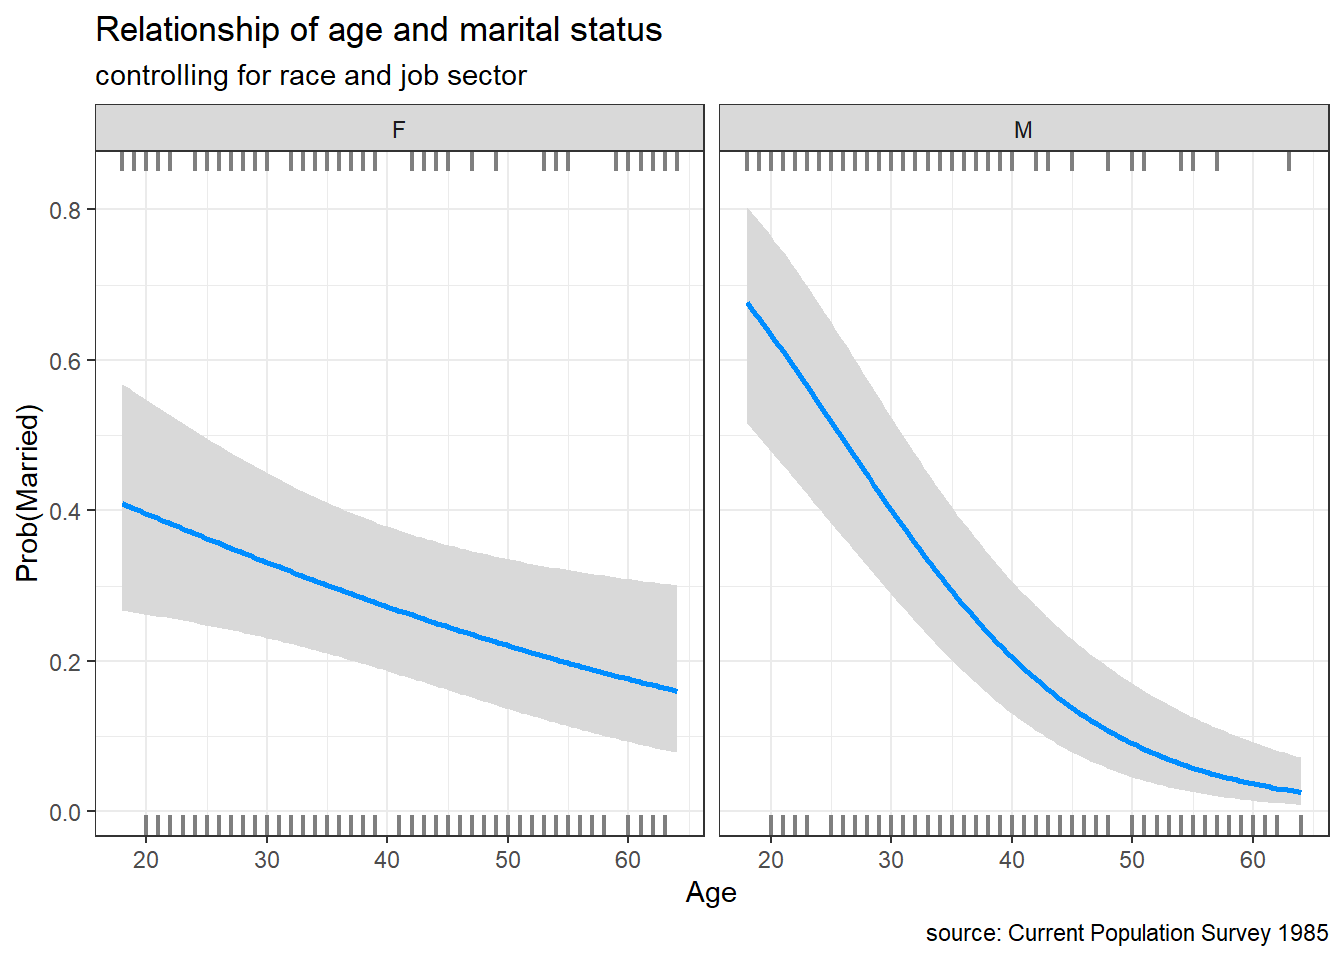 Conditional plot of age and marital status